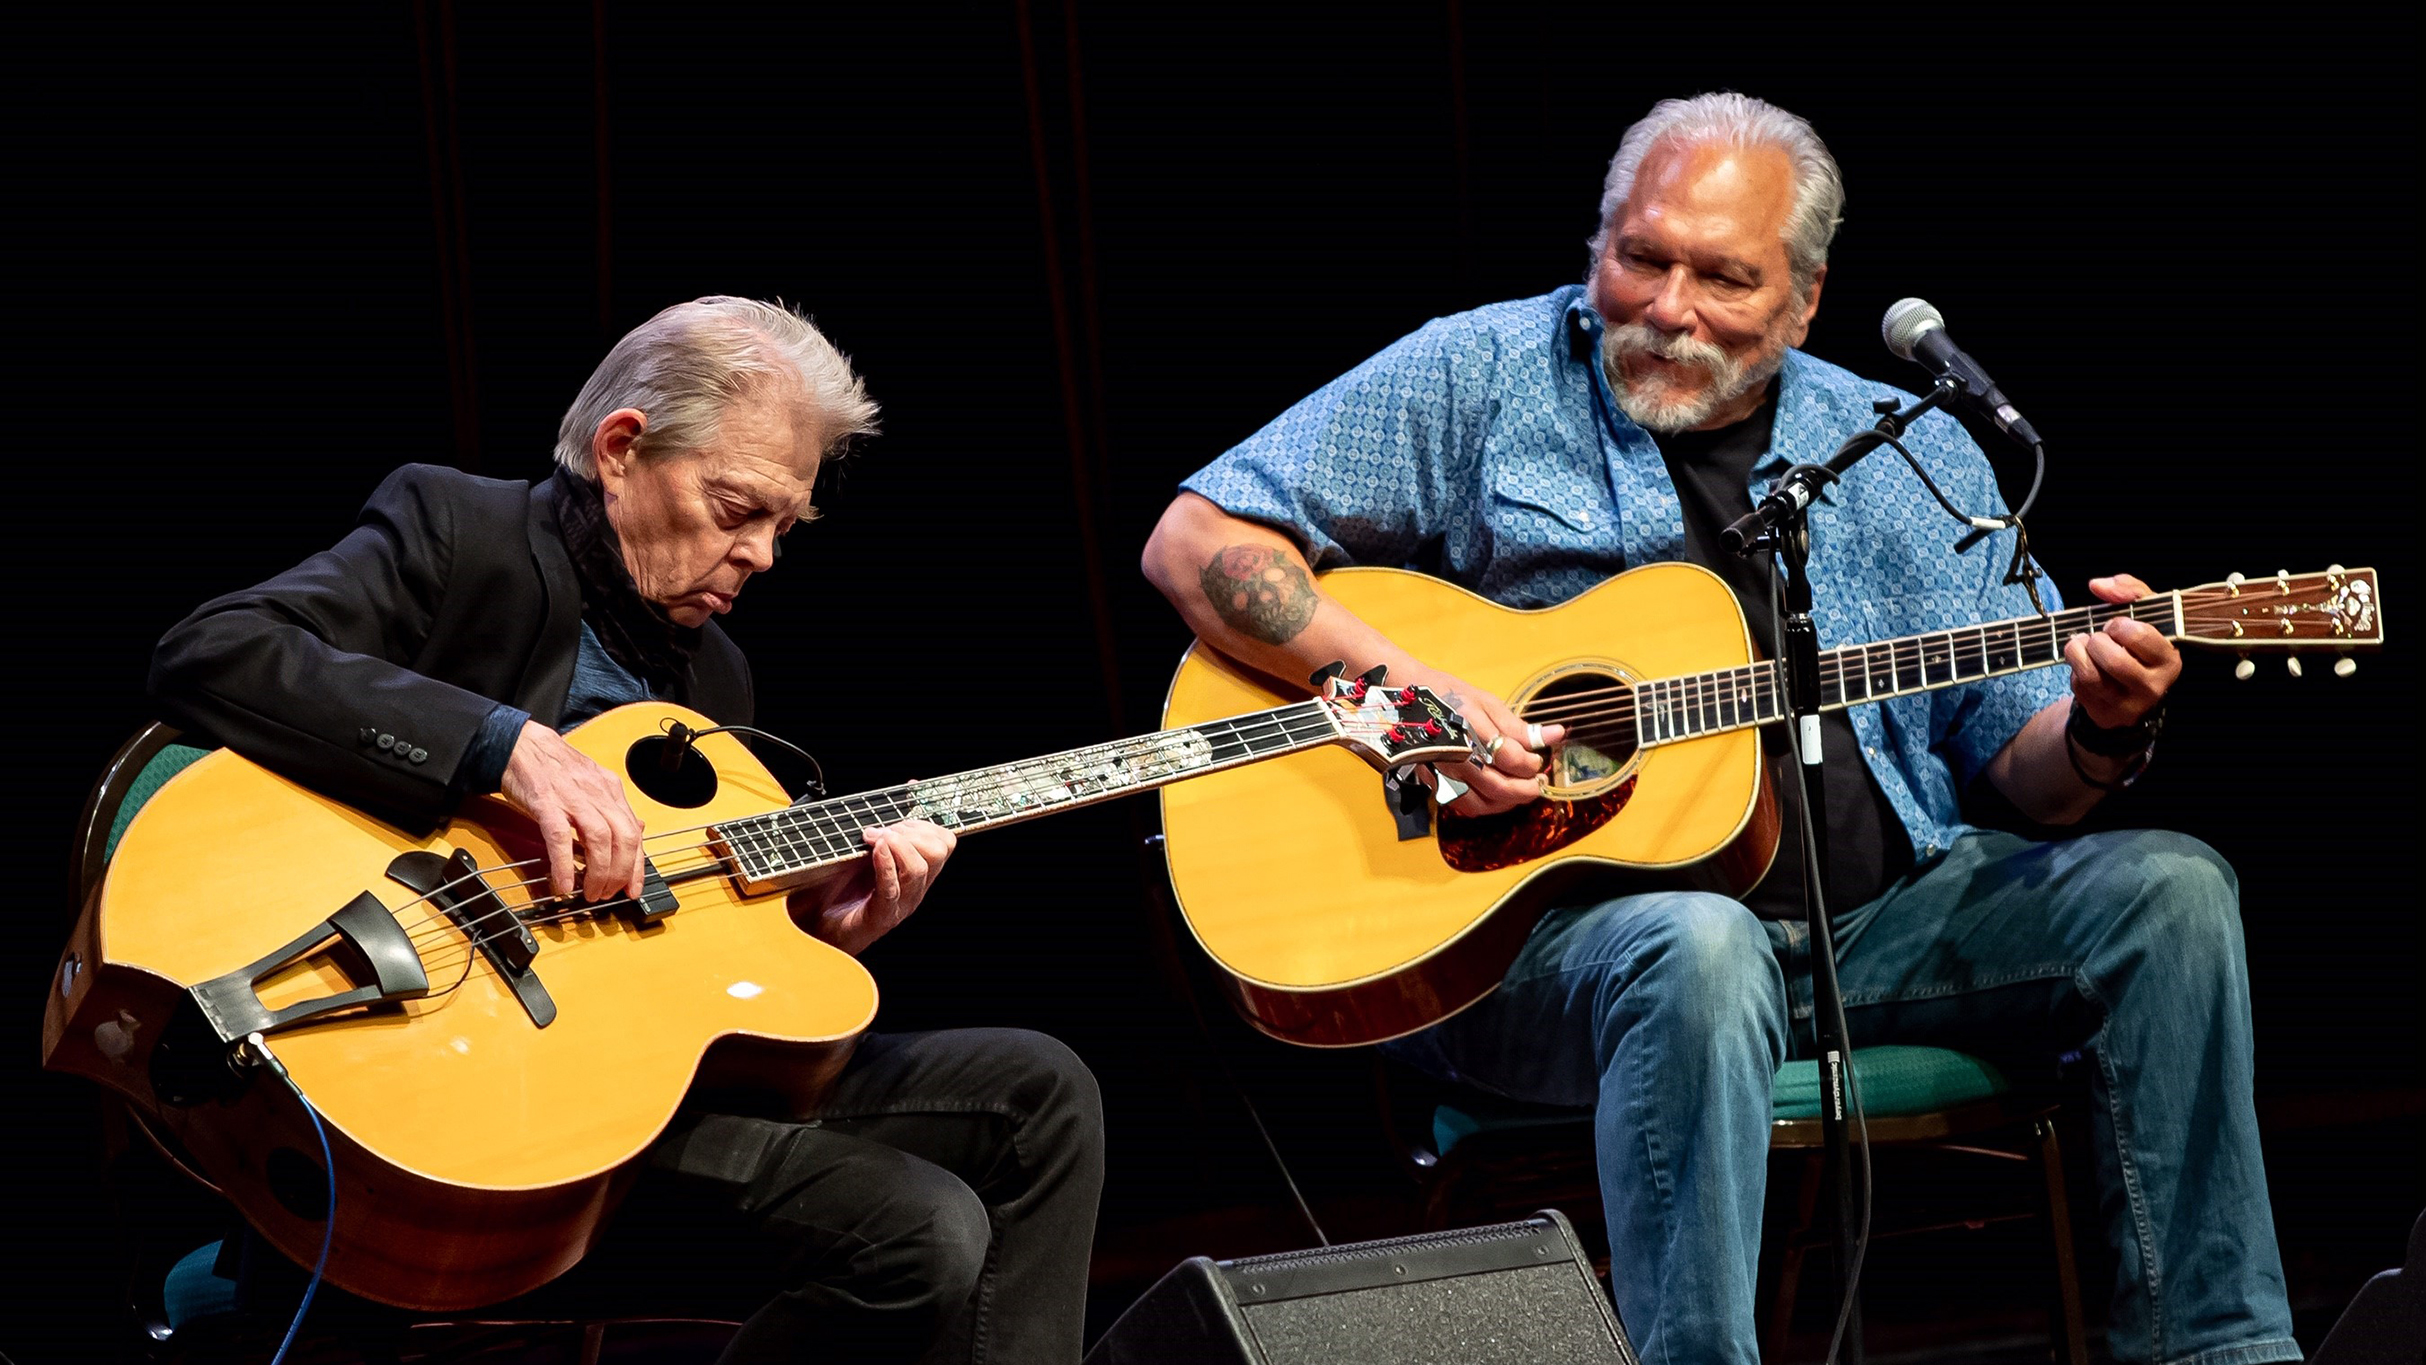 An Evening With Hot Tuna Acoustic